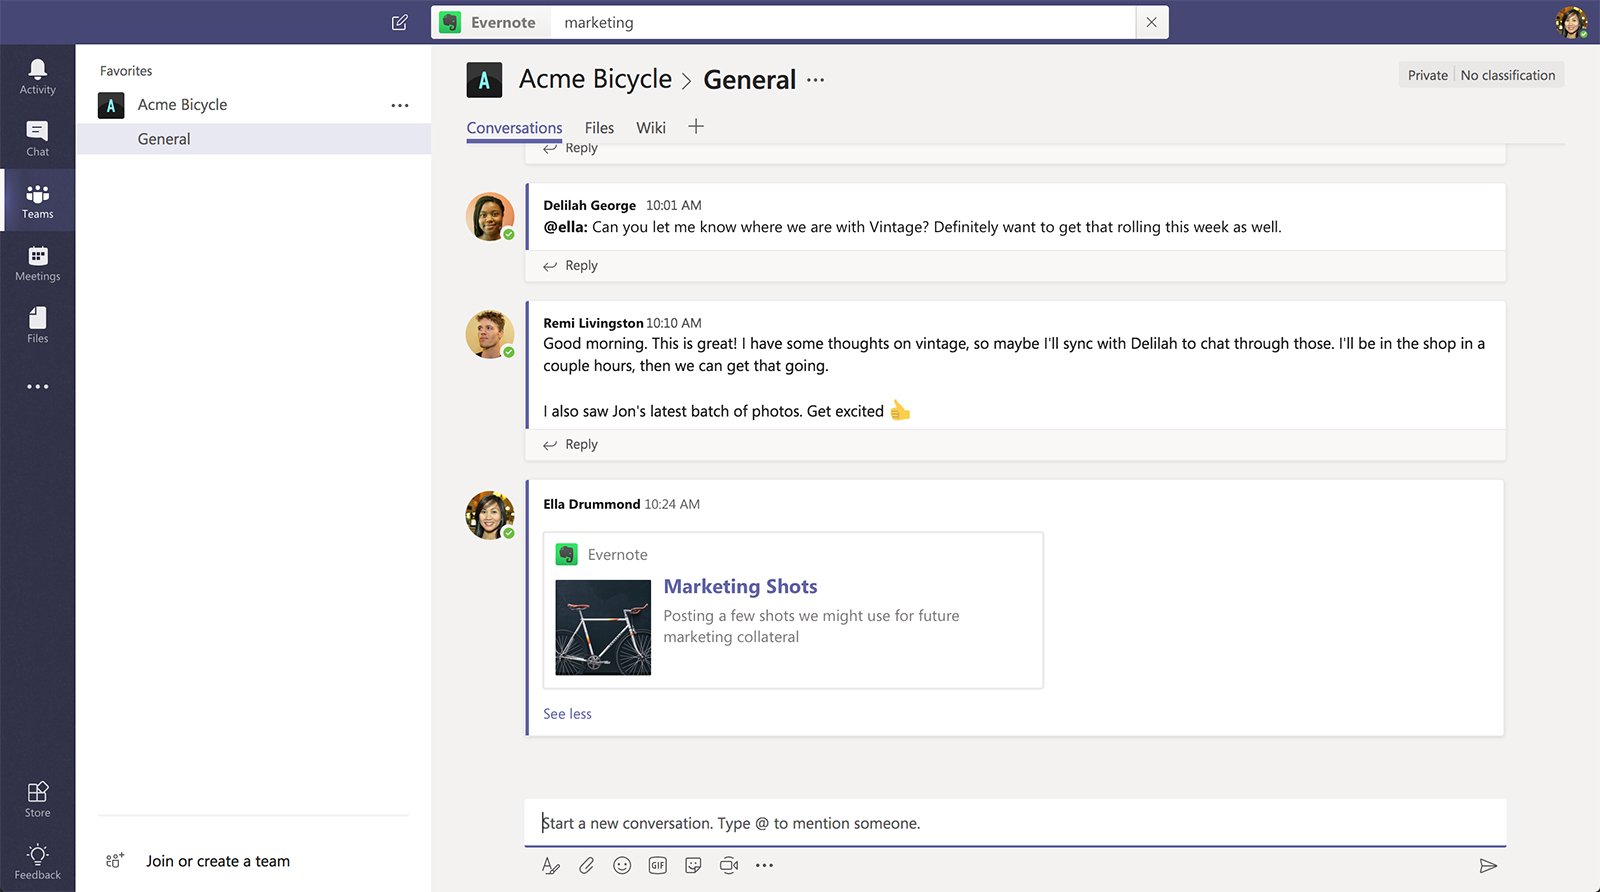 Microsoft Teams coming to government customers on July 17th